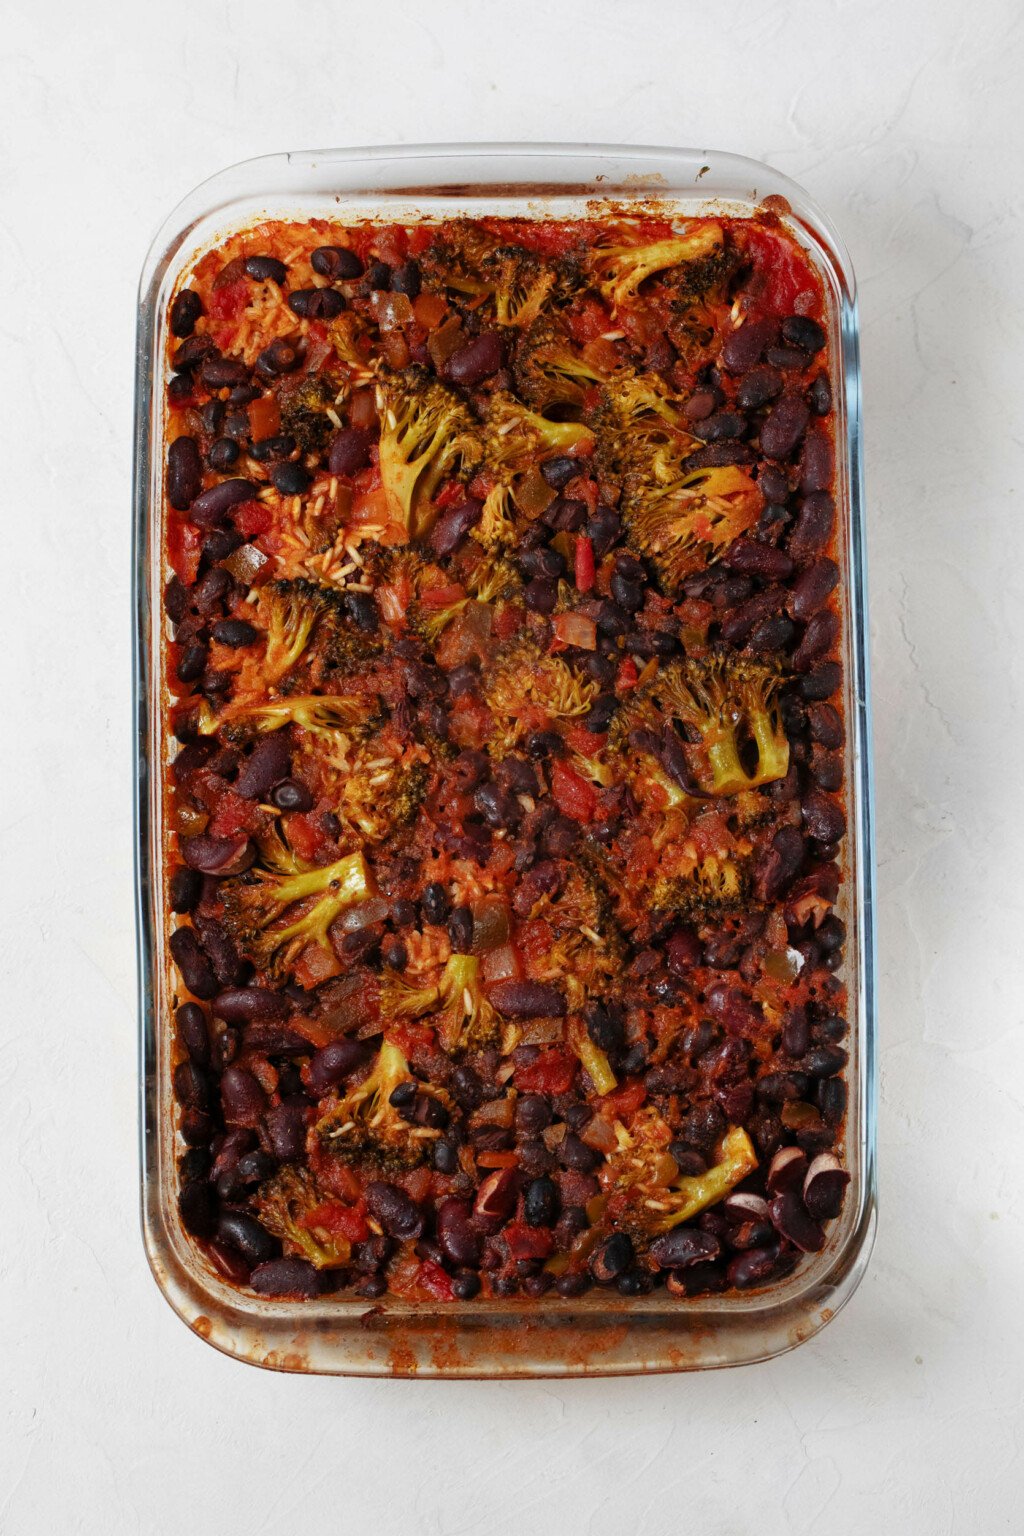 An overhead image of a baked rice and bean dish. The top is has darkened tomatoes and little pieces of broccoli visible.